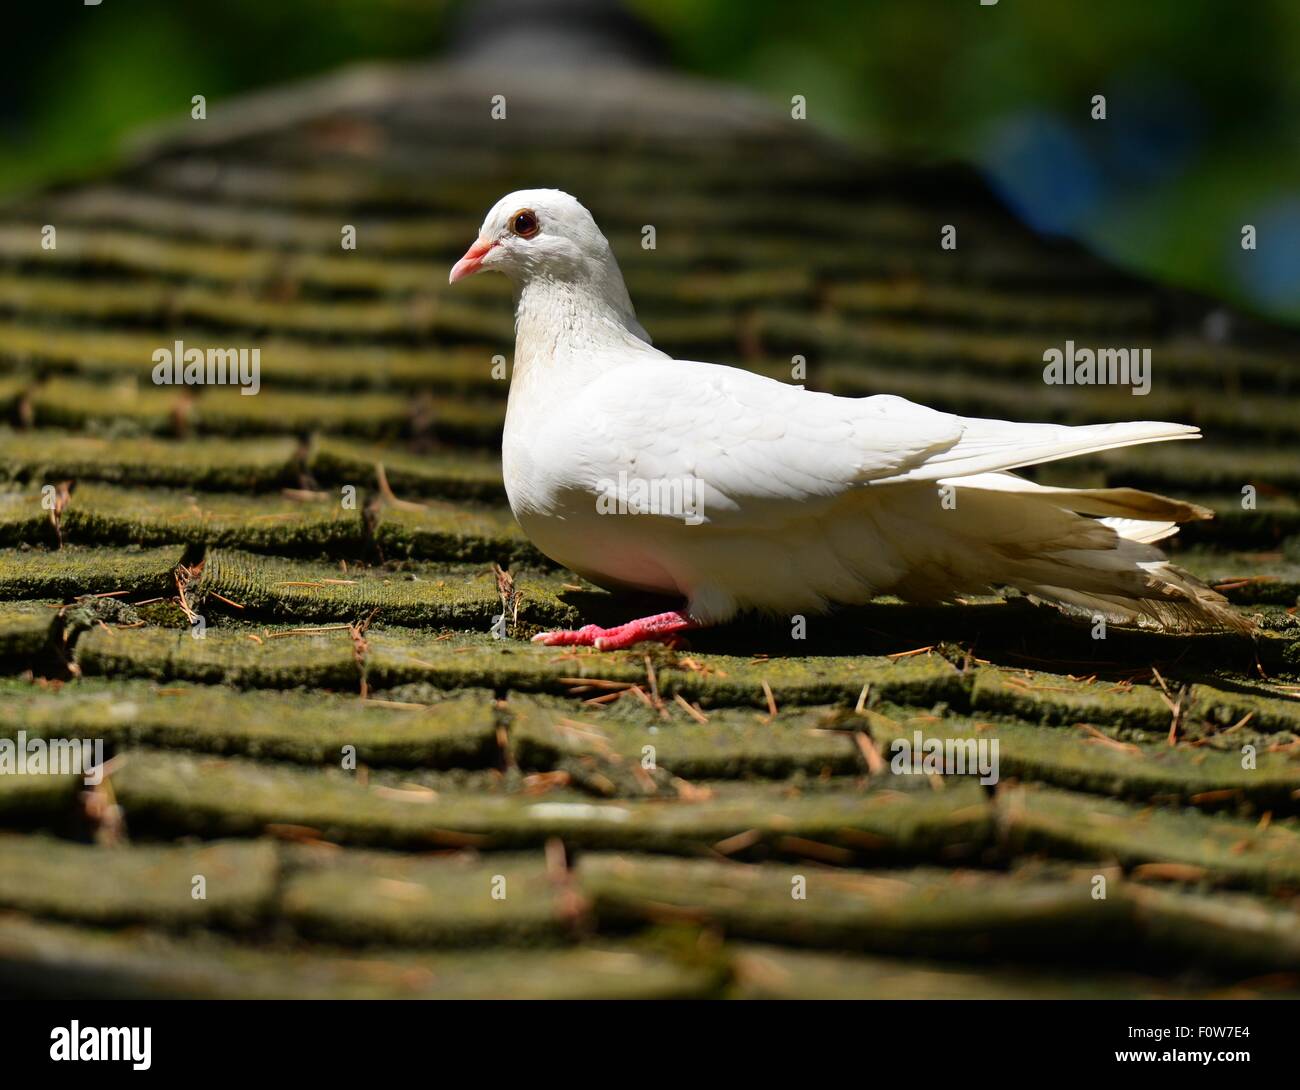 A white Dove on a roof in England Stock Photo